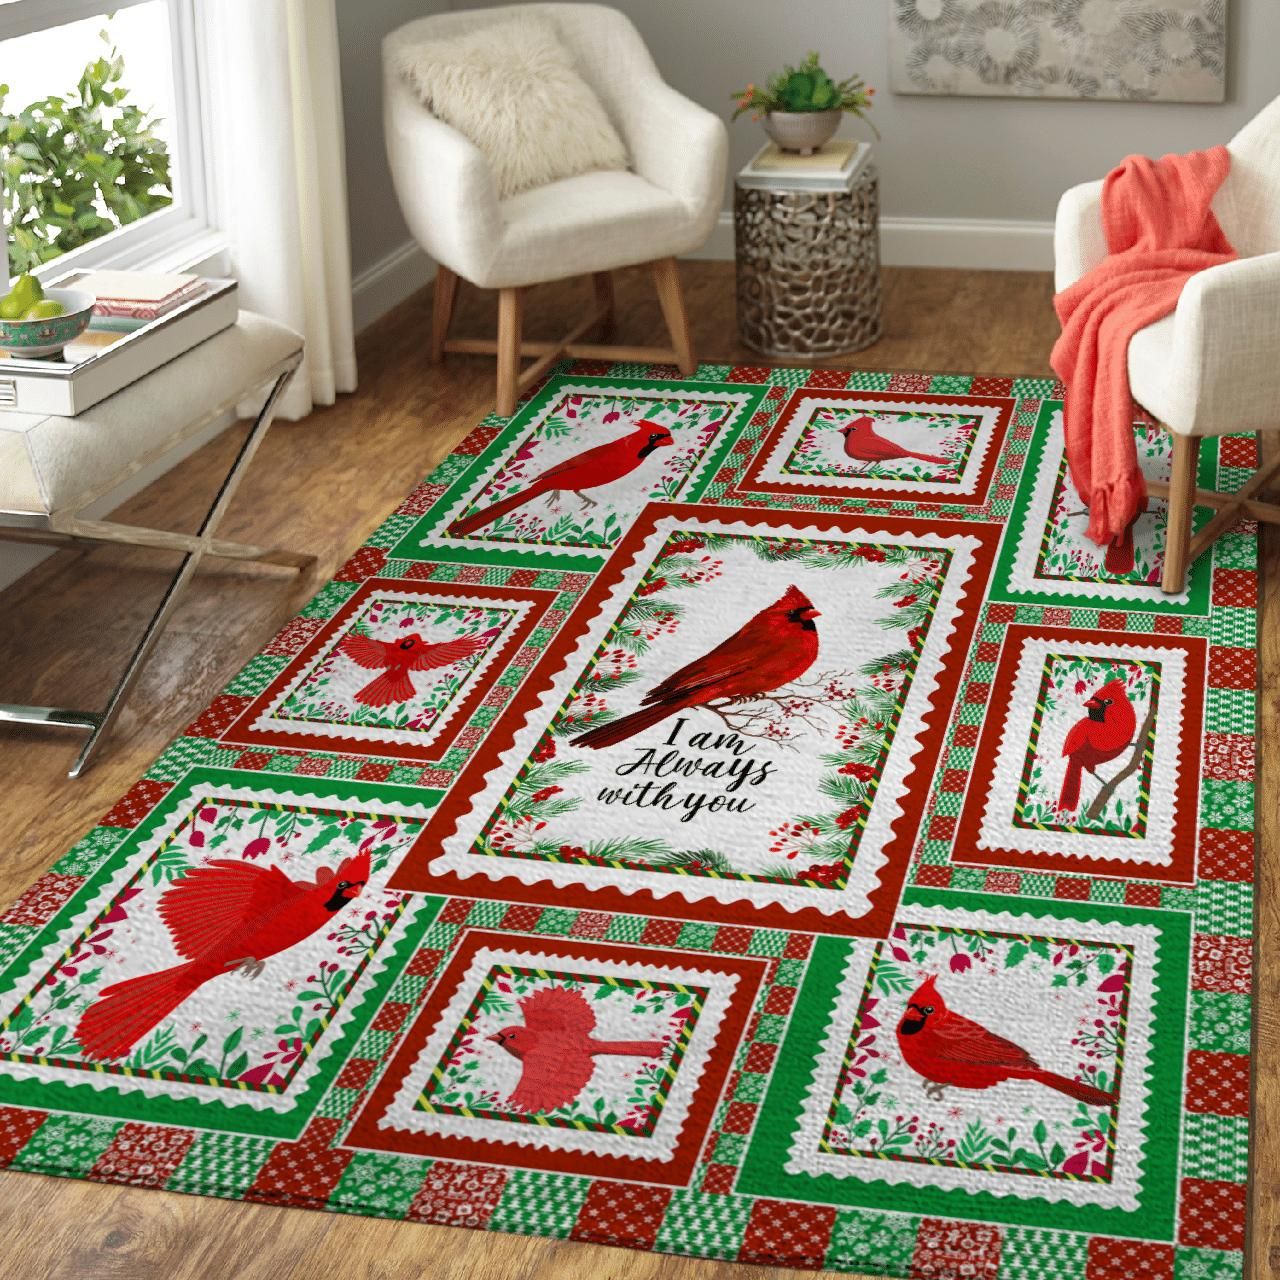 Red Cardinal I Am Always With You 3D Grapic Design Area Rug